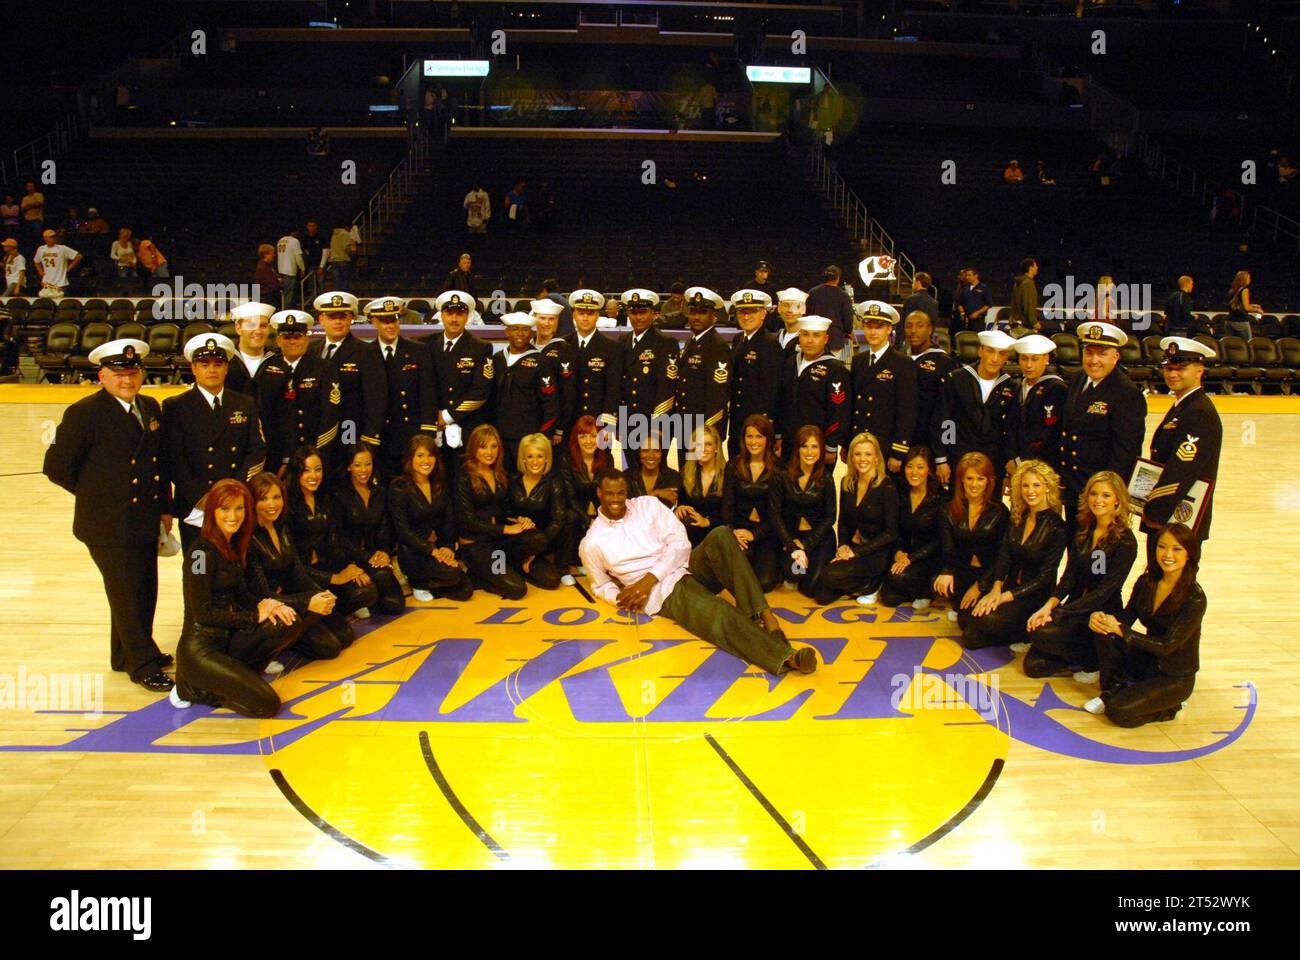 0612106536T-107 Los Angeles, Calif. (Dec. 10, 2006) - Crew members from the fast attack submarine USS Los Angeles (SSN 688) pose for a photo with the Los Angeles Lakers Cheerleaders and former NBA player and Annapolis Naval Academy graduate David Robinson after the Lakers won against the San Antonio Spurs.   The Los Angeles is currently participating in a namesake city visit. This is the first port call the Los Angeles, based out of Pearl Harbor, Hawaii, has made to the city it was named after. U.S. Navy Stock Photo